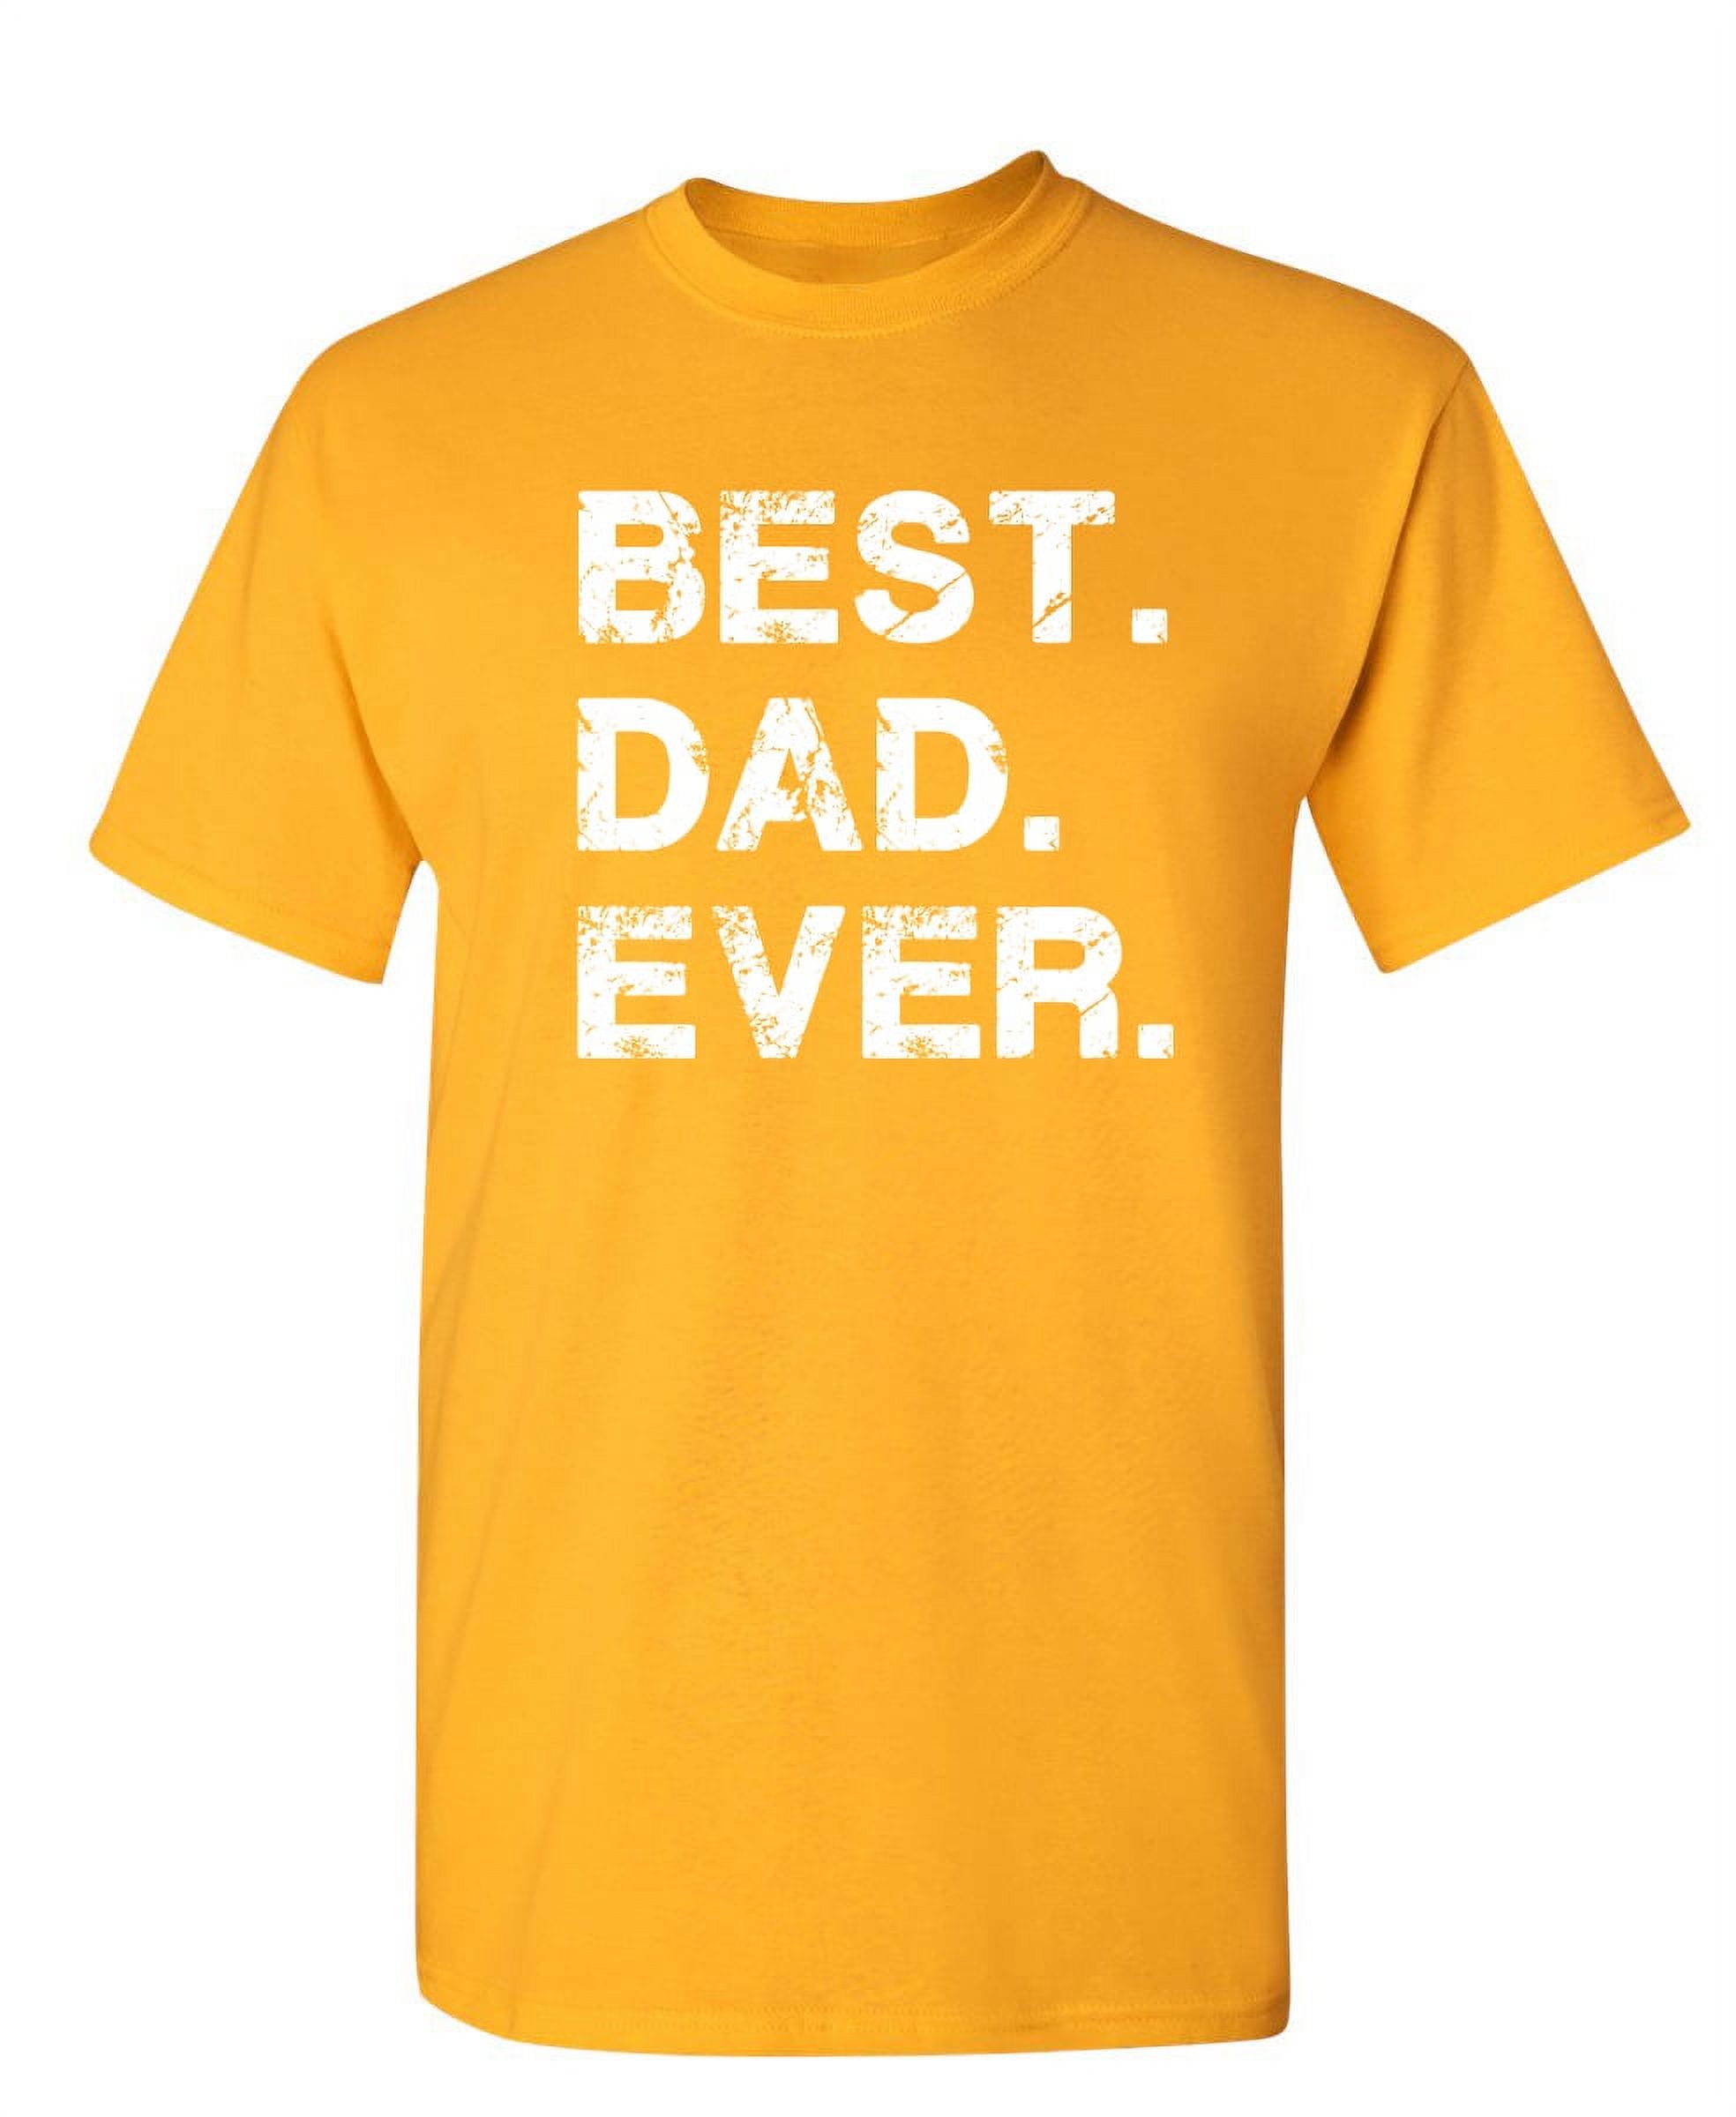 Best Dad Ever Family Tshirt Humor Novelty Sarcastic Graphic Tees Gift ...